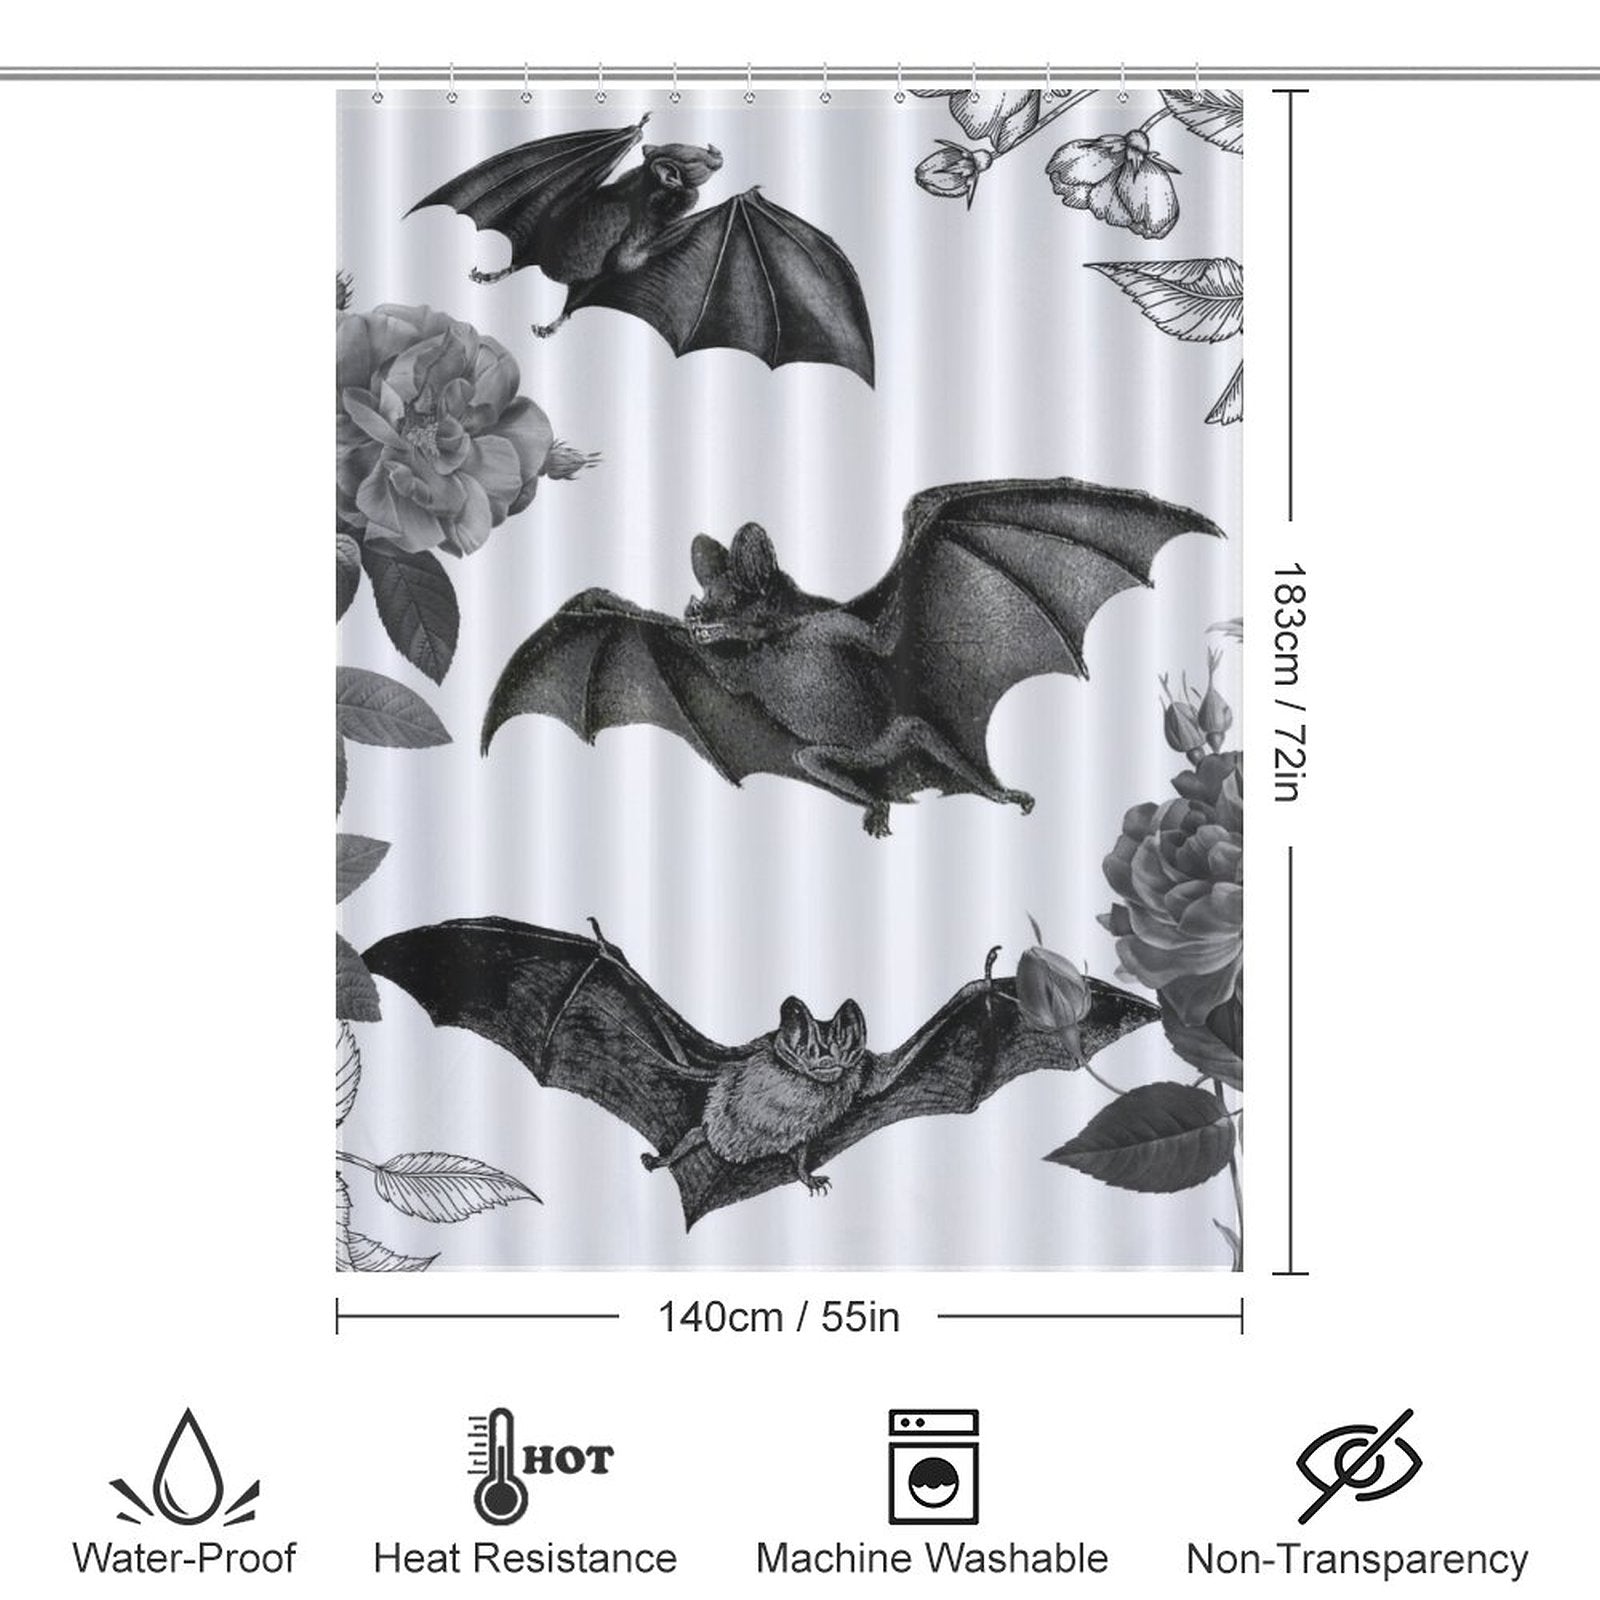 This Gothic Bat Shower Curtain by Cotton Cat adds a touch of gothic elegance with black and white roses.